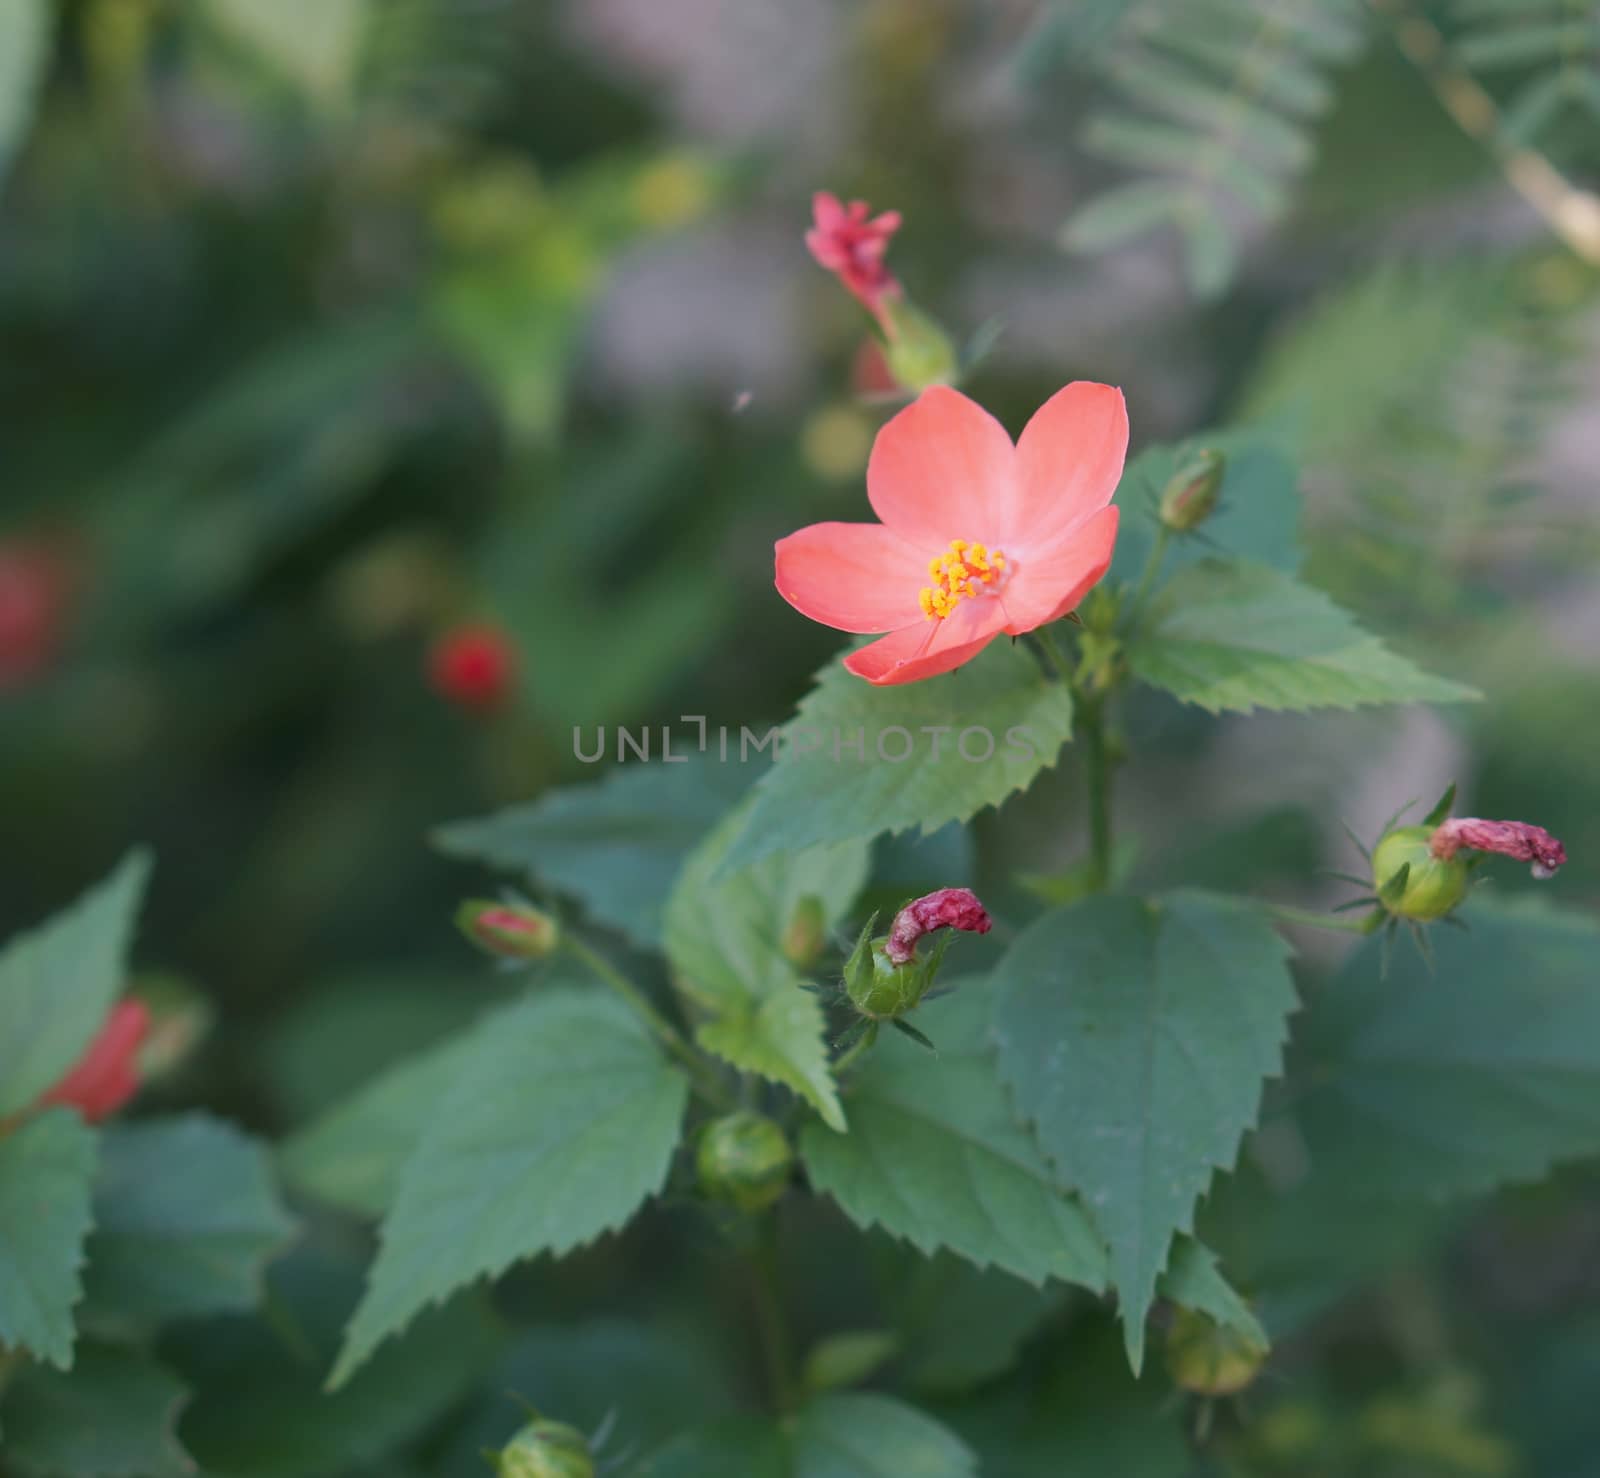 Small of Hibiscus flower by ninun